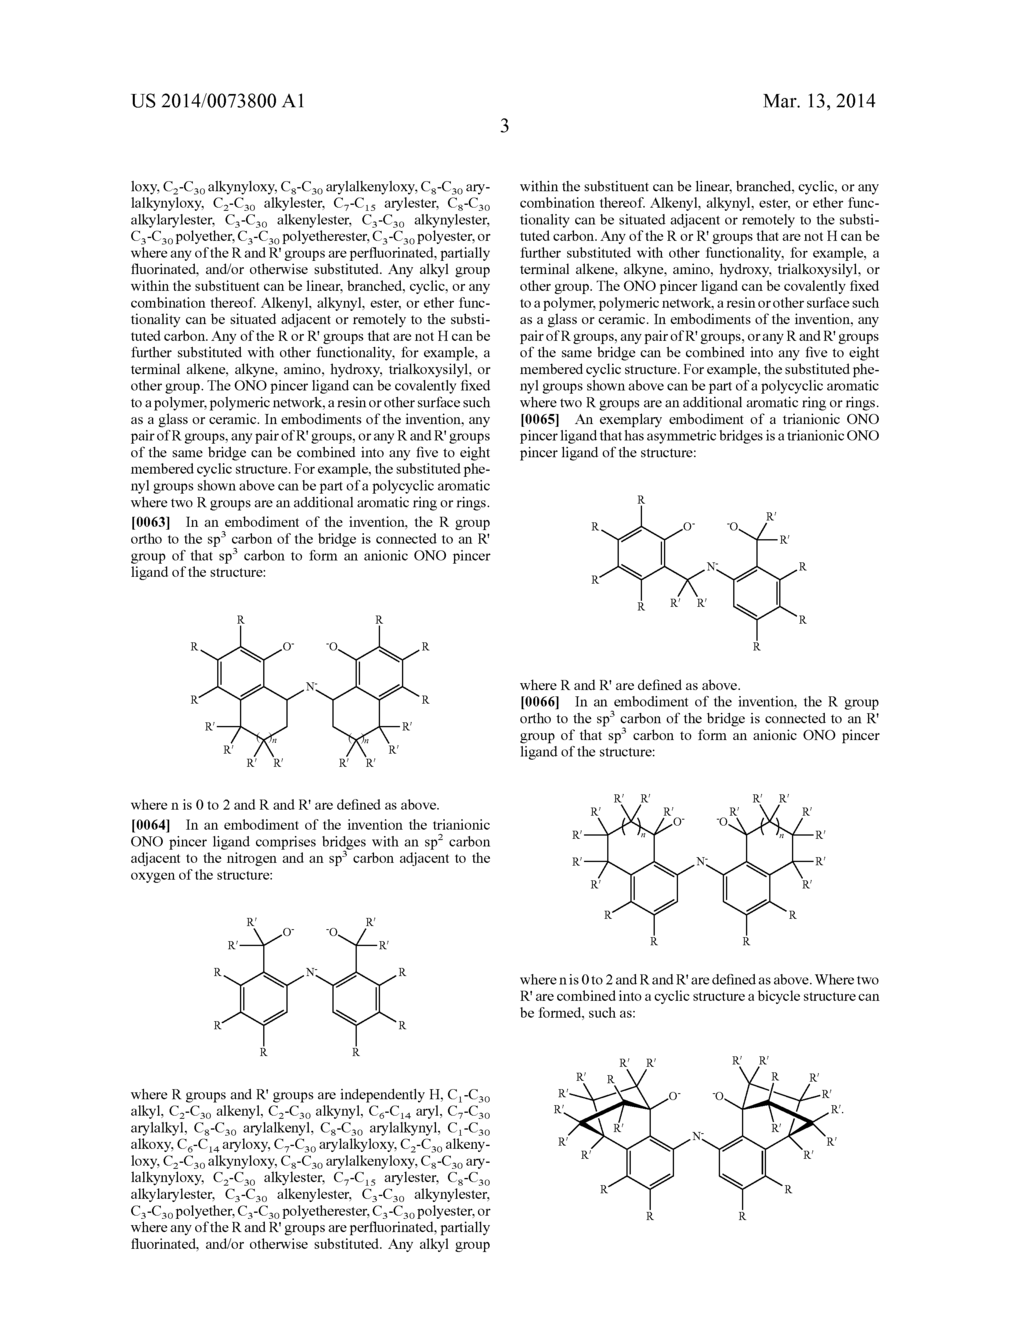 ONO PINCER LIGANDS AND ONO PINCER LIGAND COMPRISING METAL COMPLEXES - diagram, schematic, and image 53